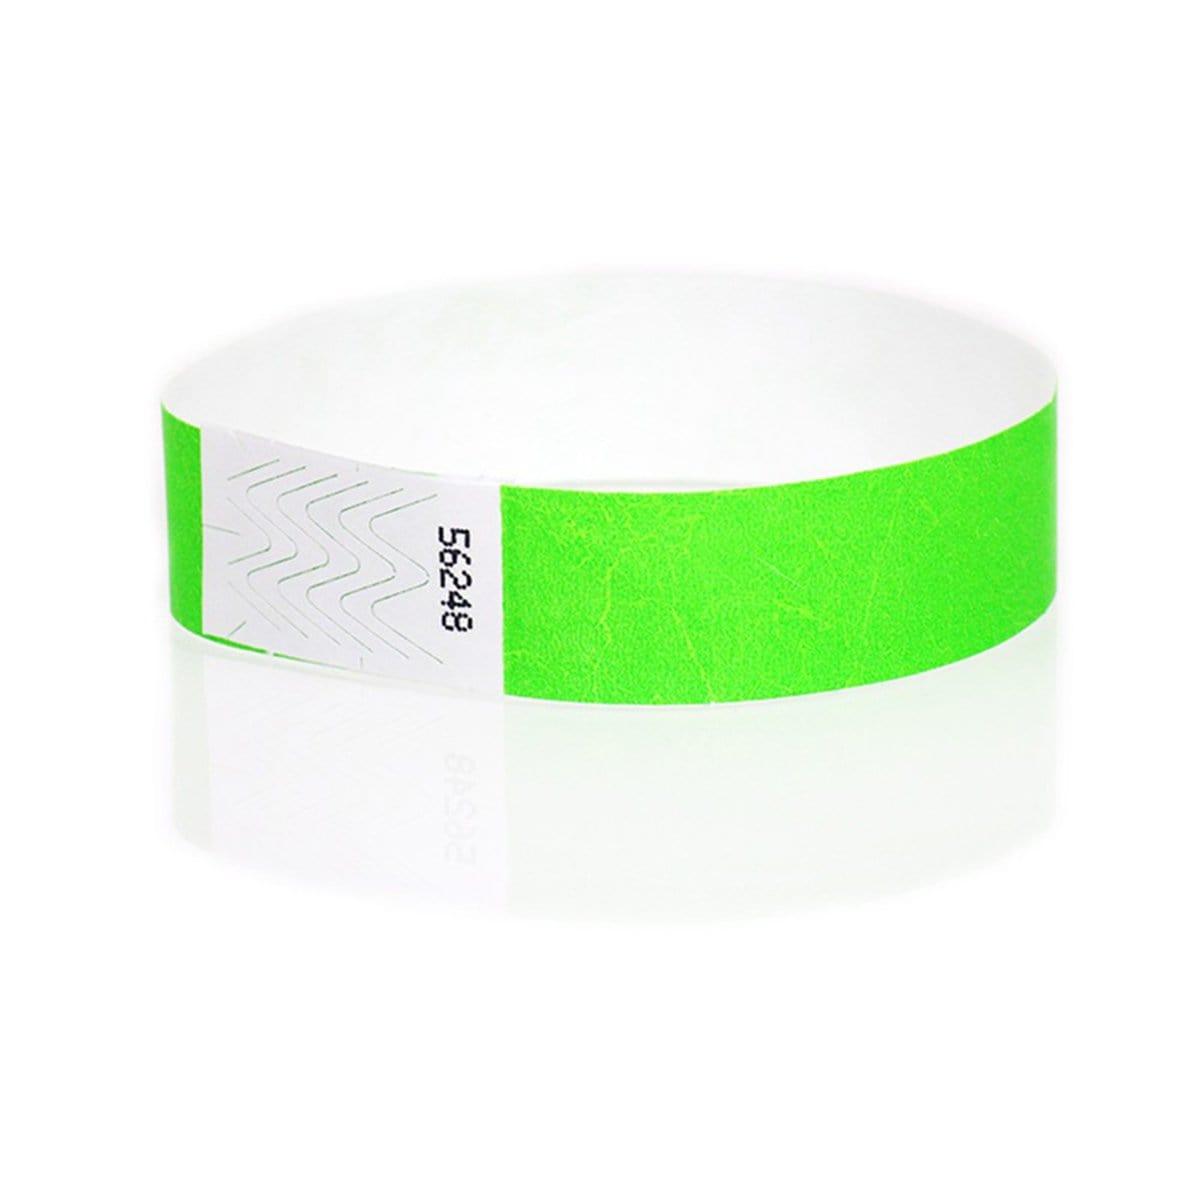 Buy Party Supplies Wristband Supertek 3/4in Neon Lime 500 Pkg. sold at Party Expert